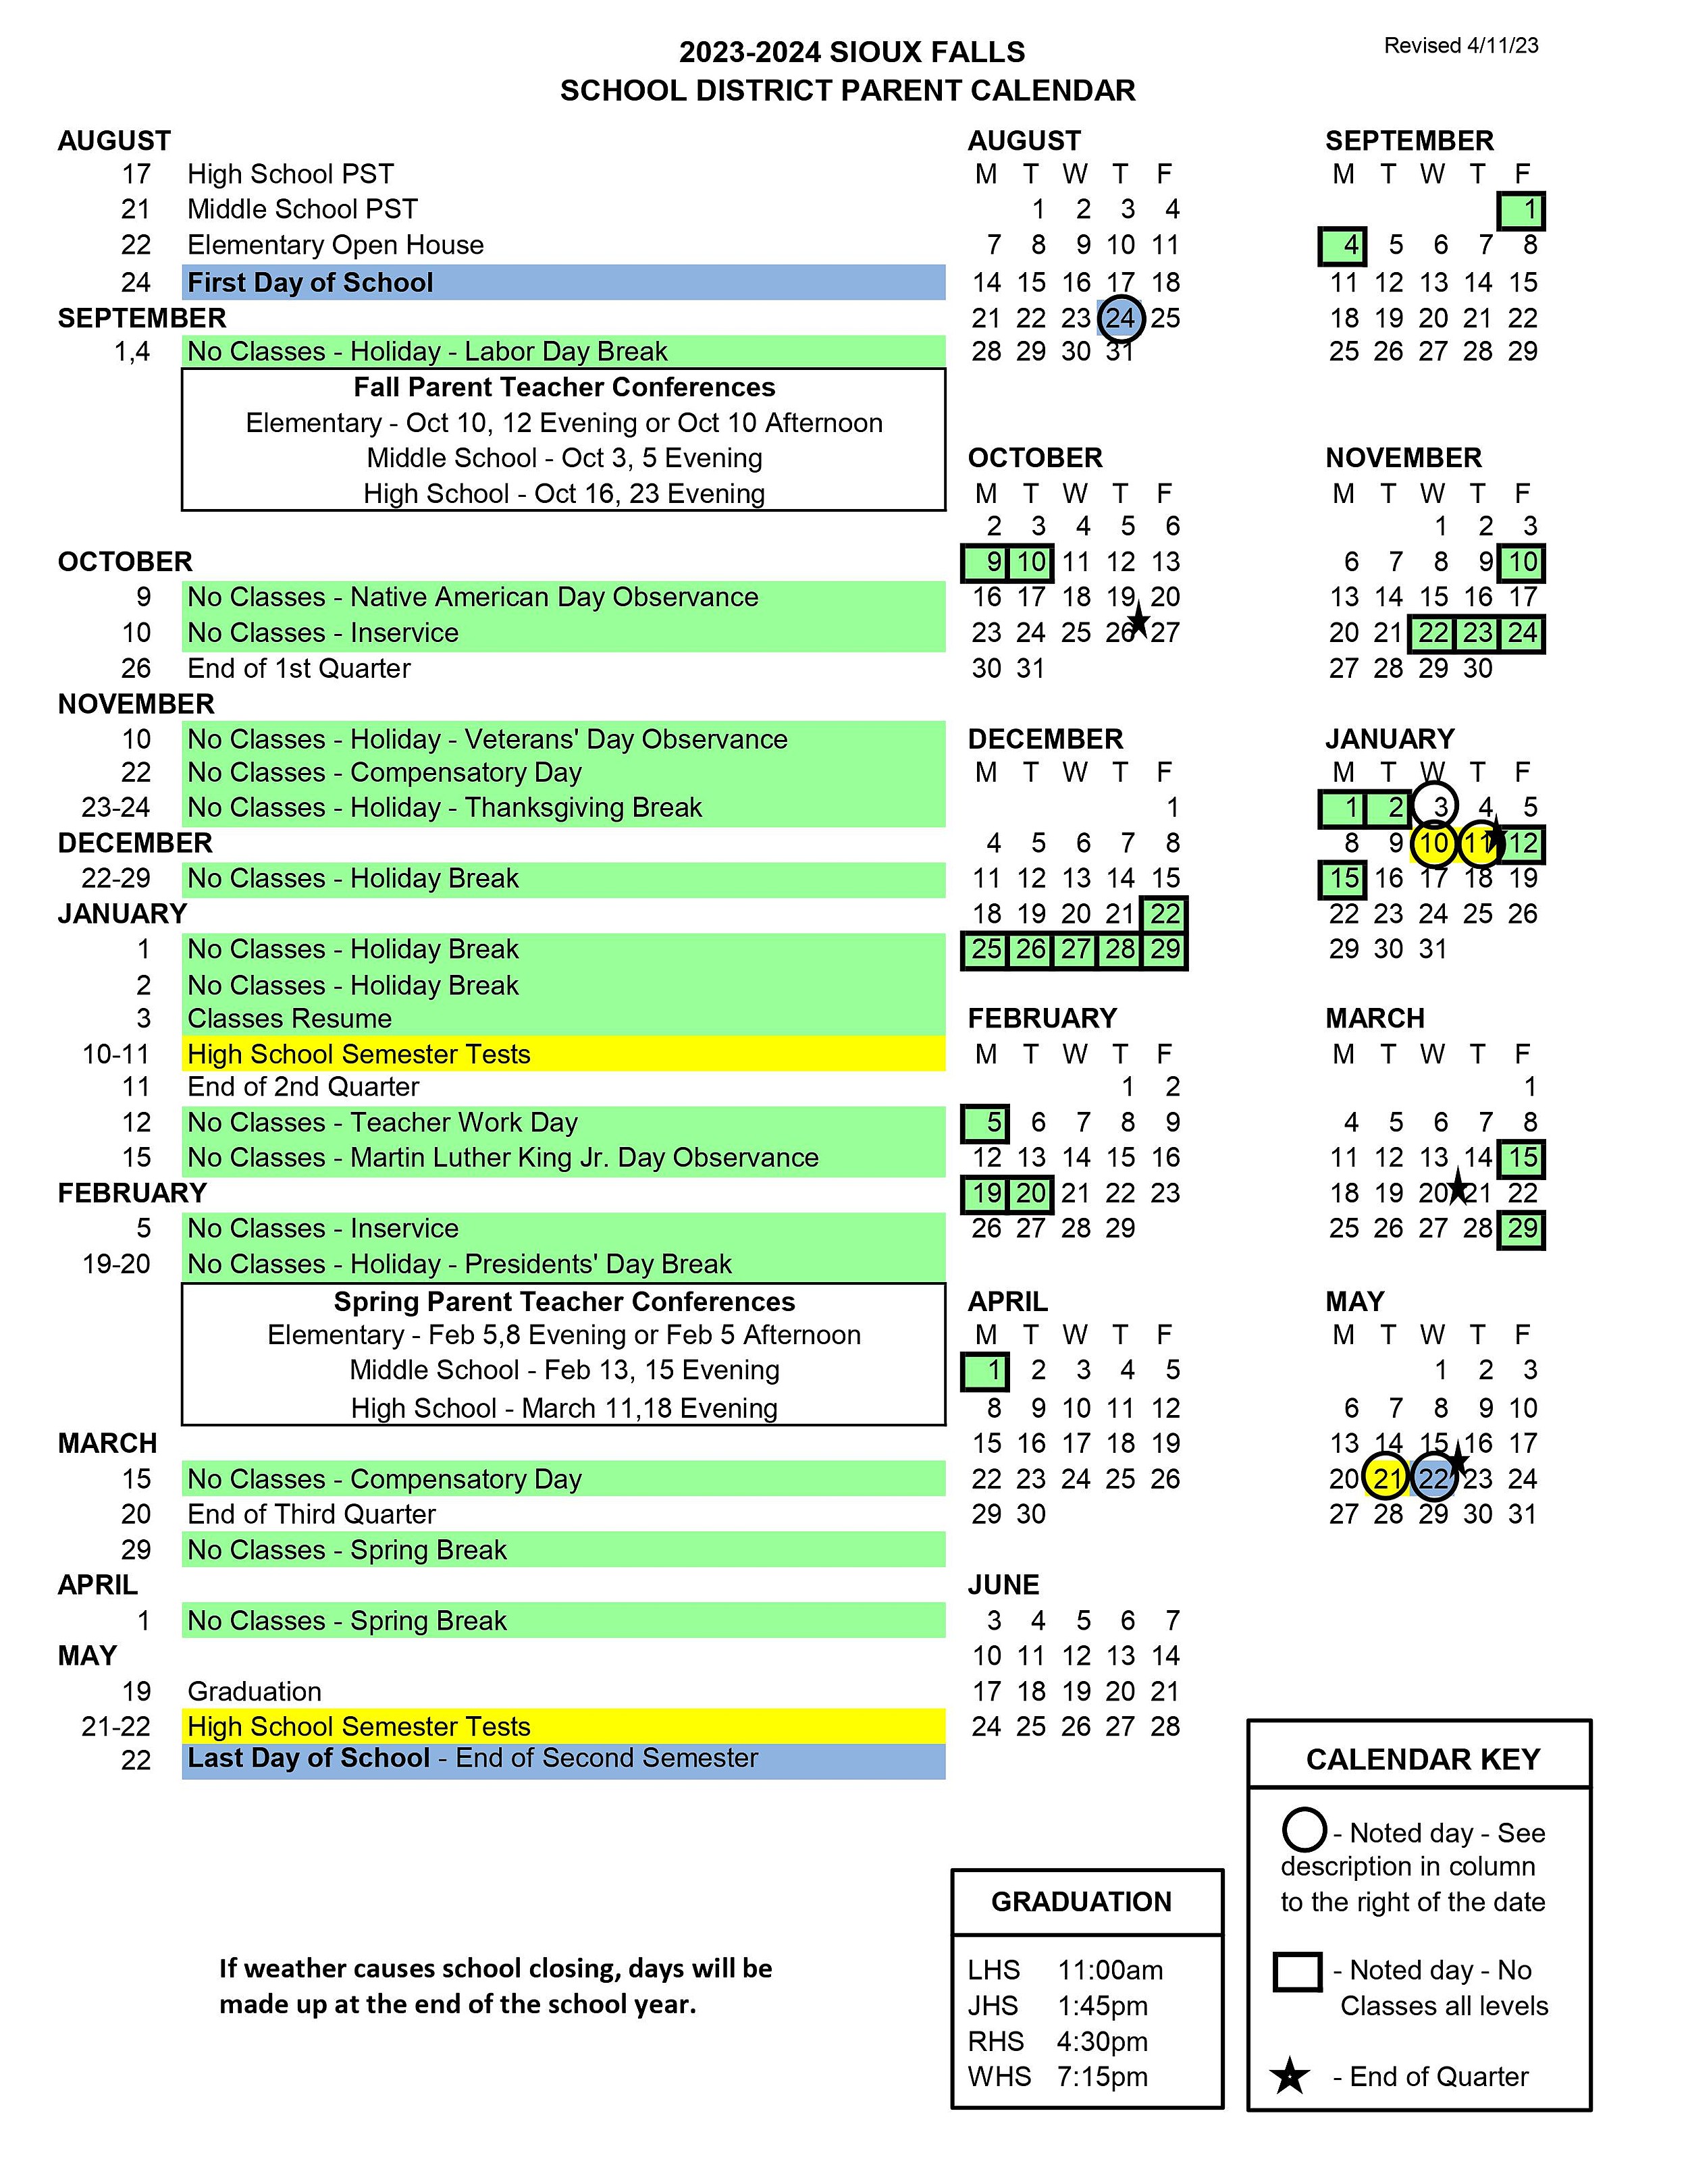 Here is the Sioux Falls School District Calendar 20232024